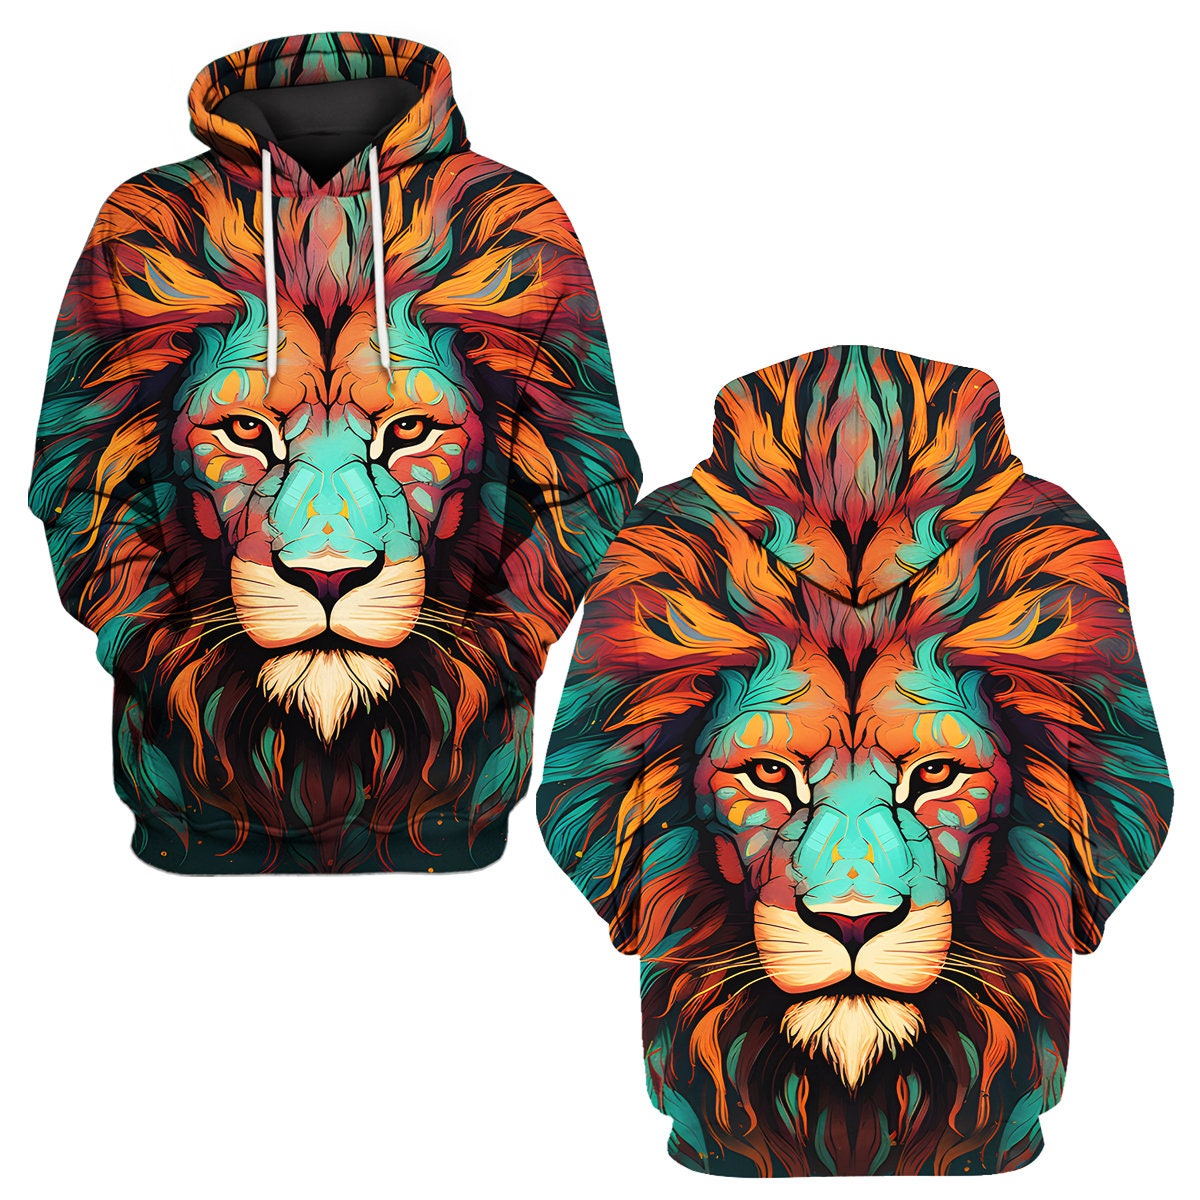 Discover All Over Print Lion Hoodie For Men Women, Men's Novelty Hoodie, 3d Print Hoodies Lion, Lion Pullover Sweatshirts For Men